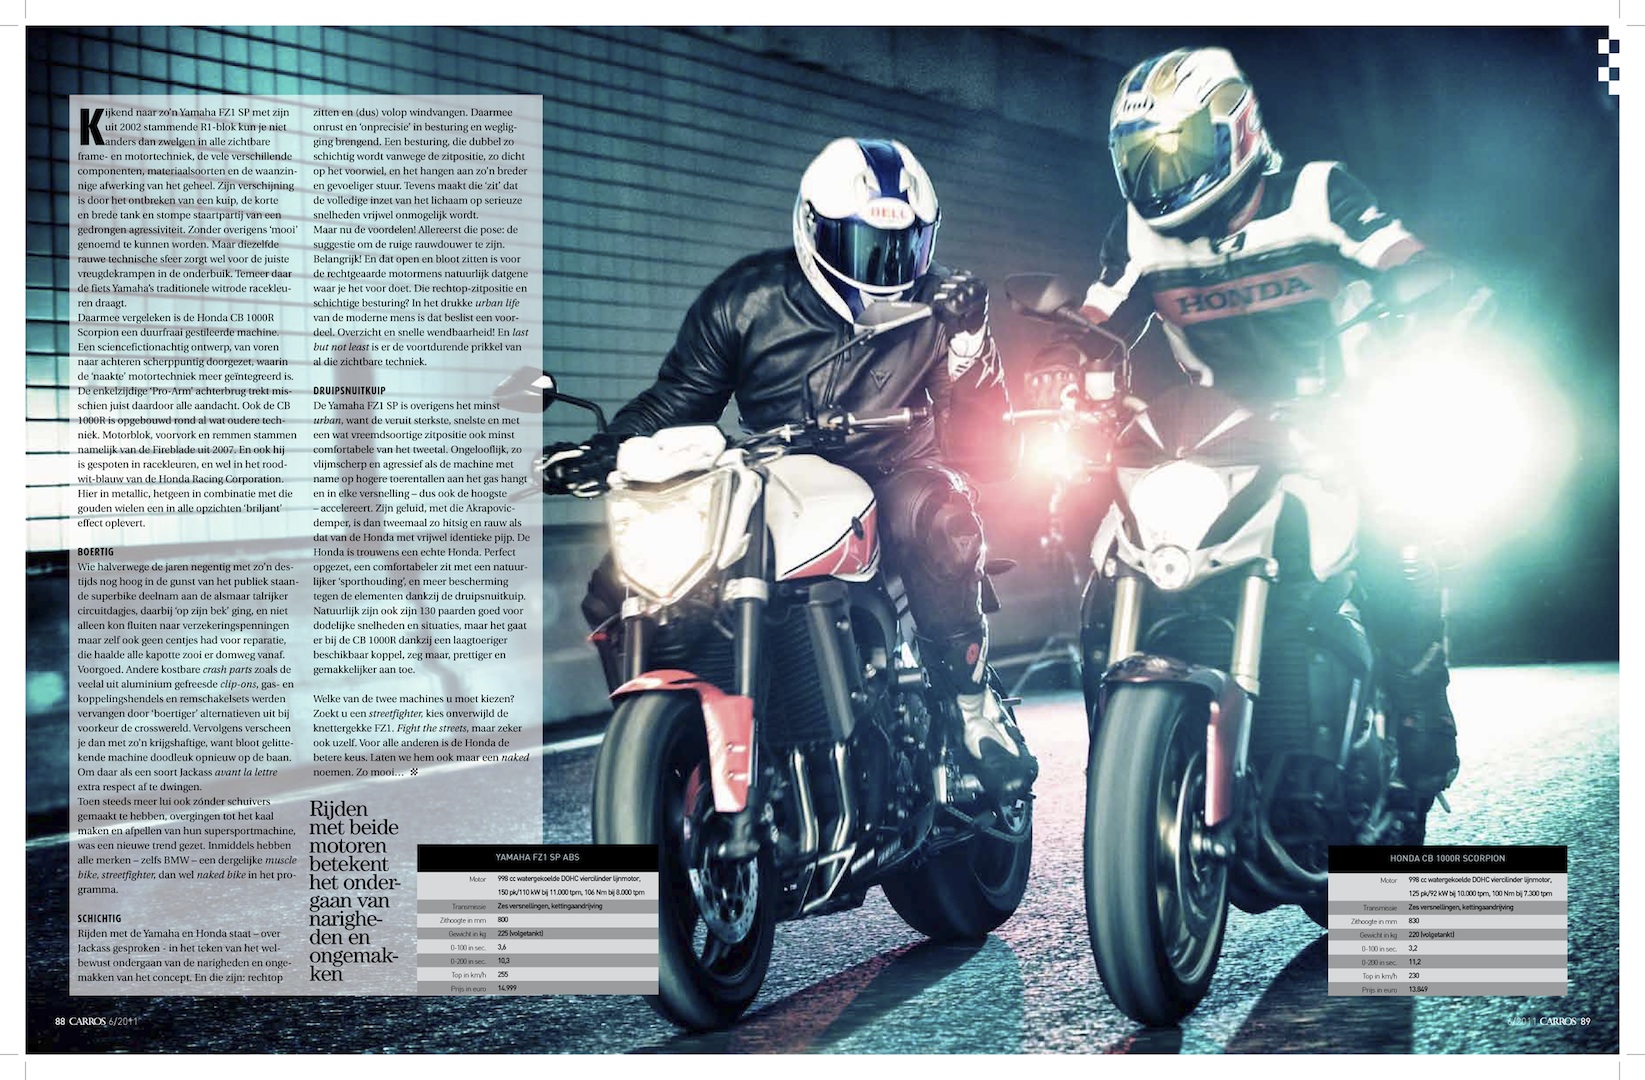 motorbikes at the speed of light